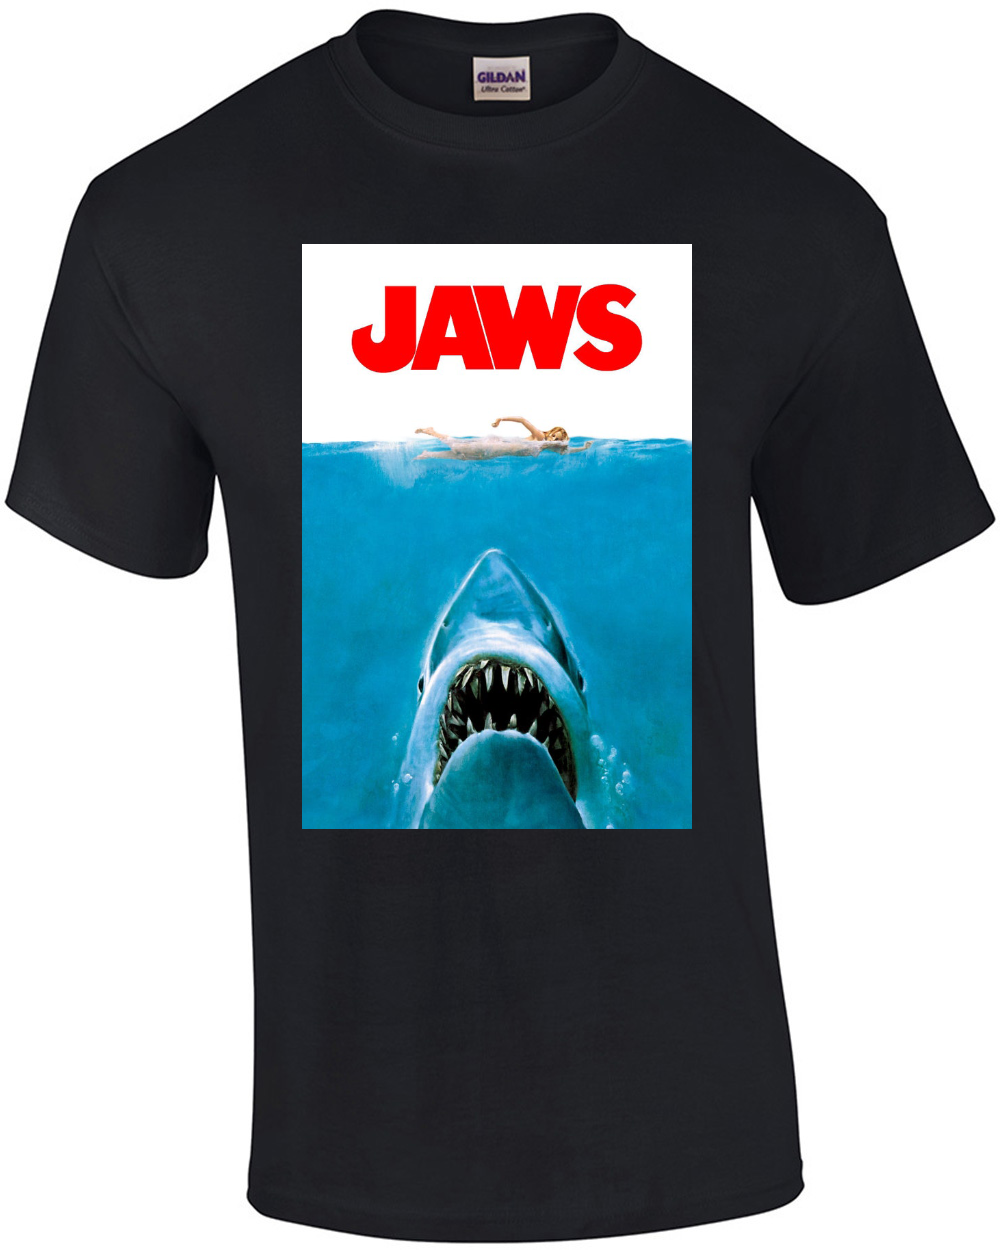 Classic Jaws Movie Poster T-Shirt